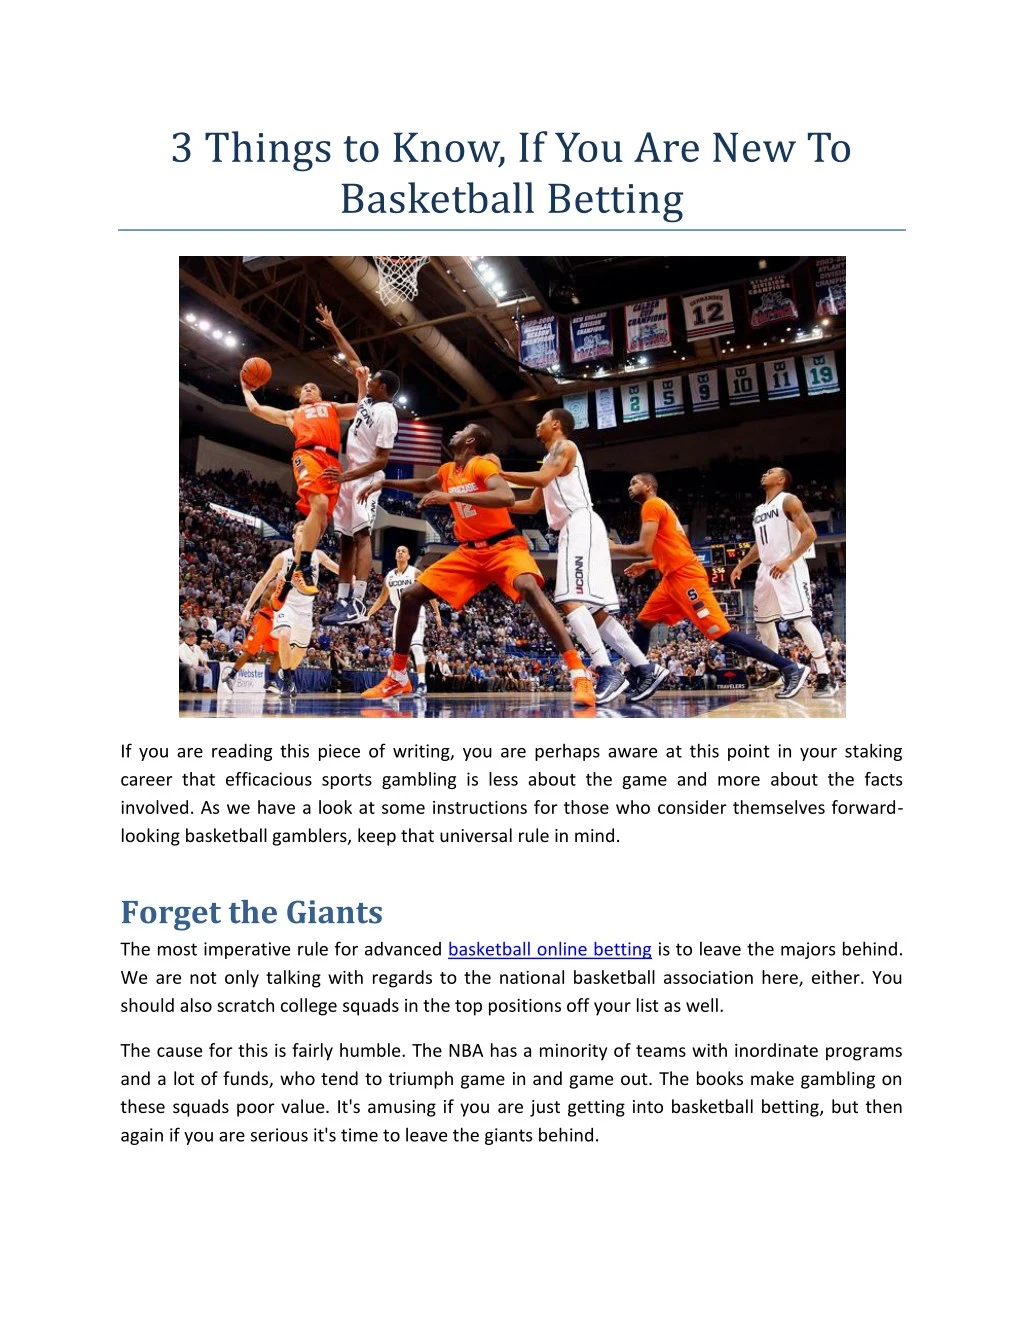 3 things to know if you are new to basketball